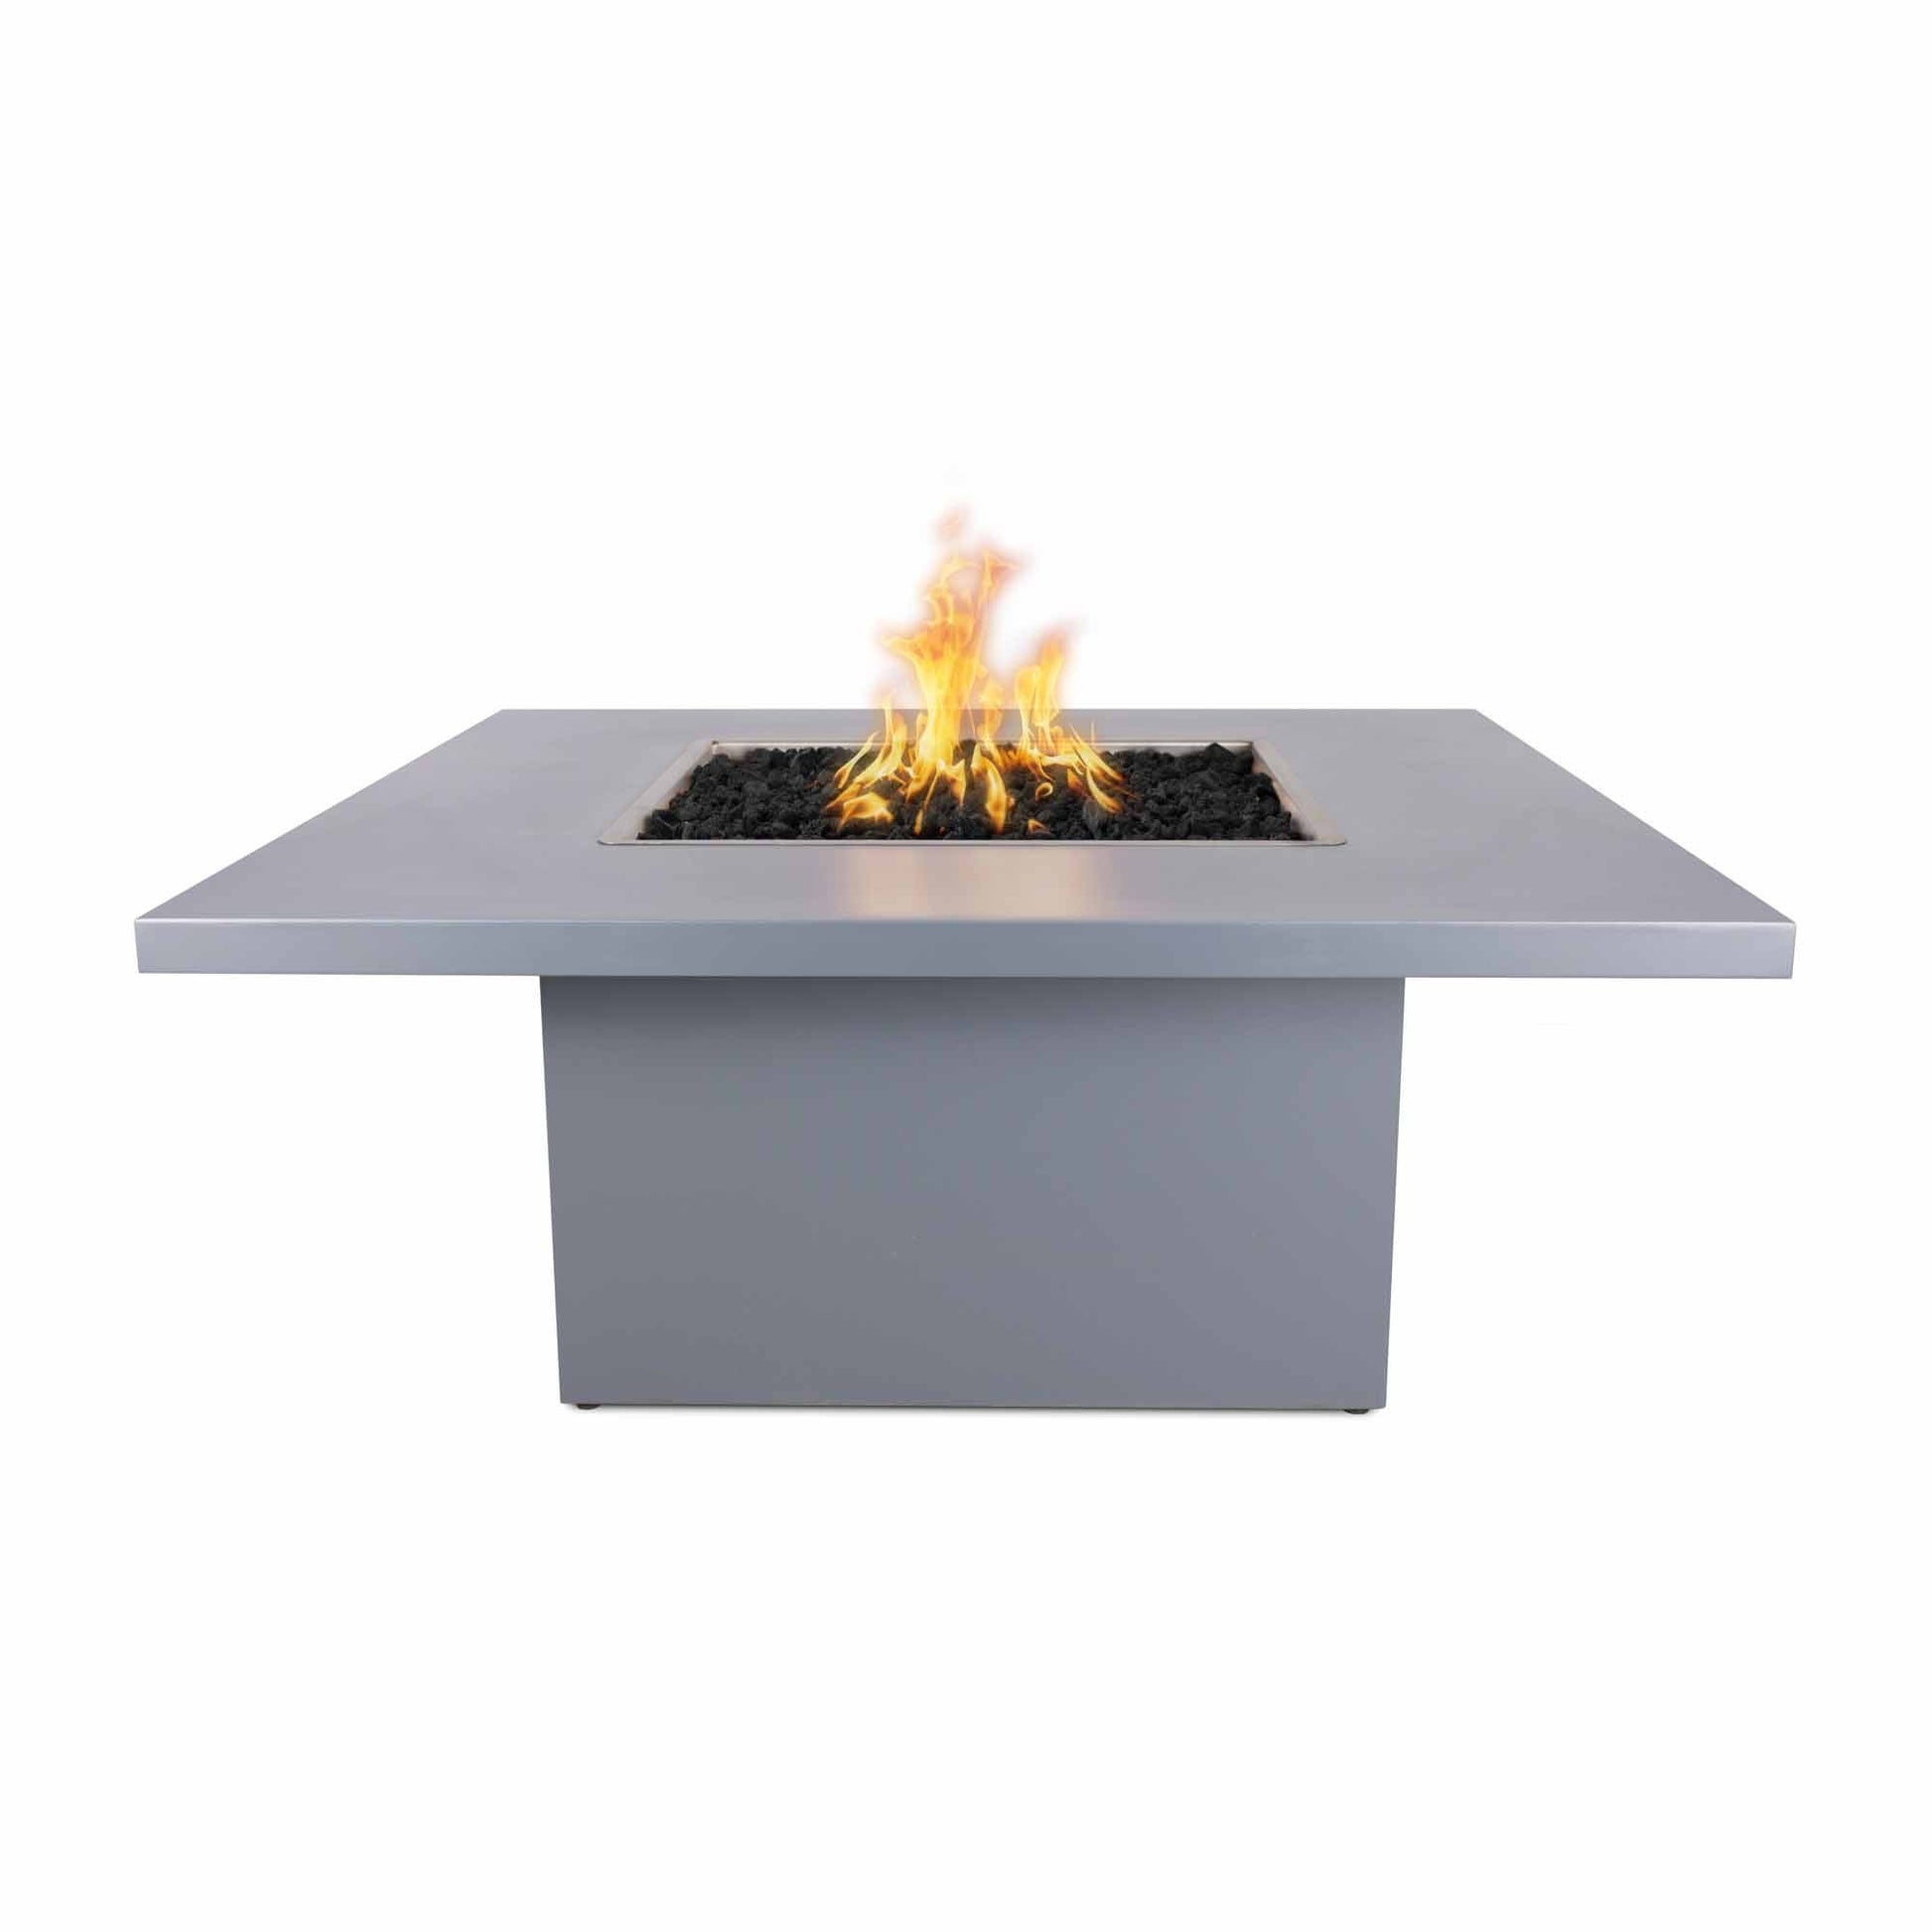 The Outdoor Plus Square Bella 36" Hammered Copper Liquid Propane Fire Pit with Match Lit Ignition